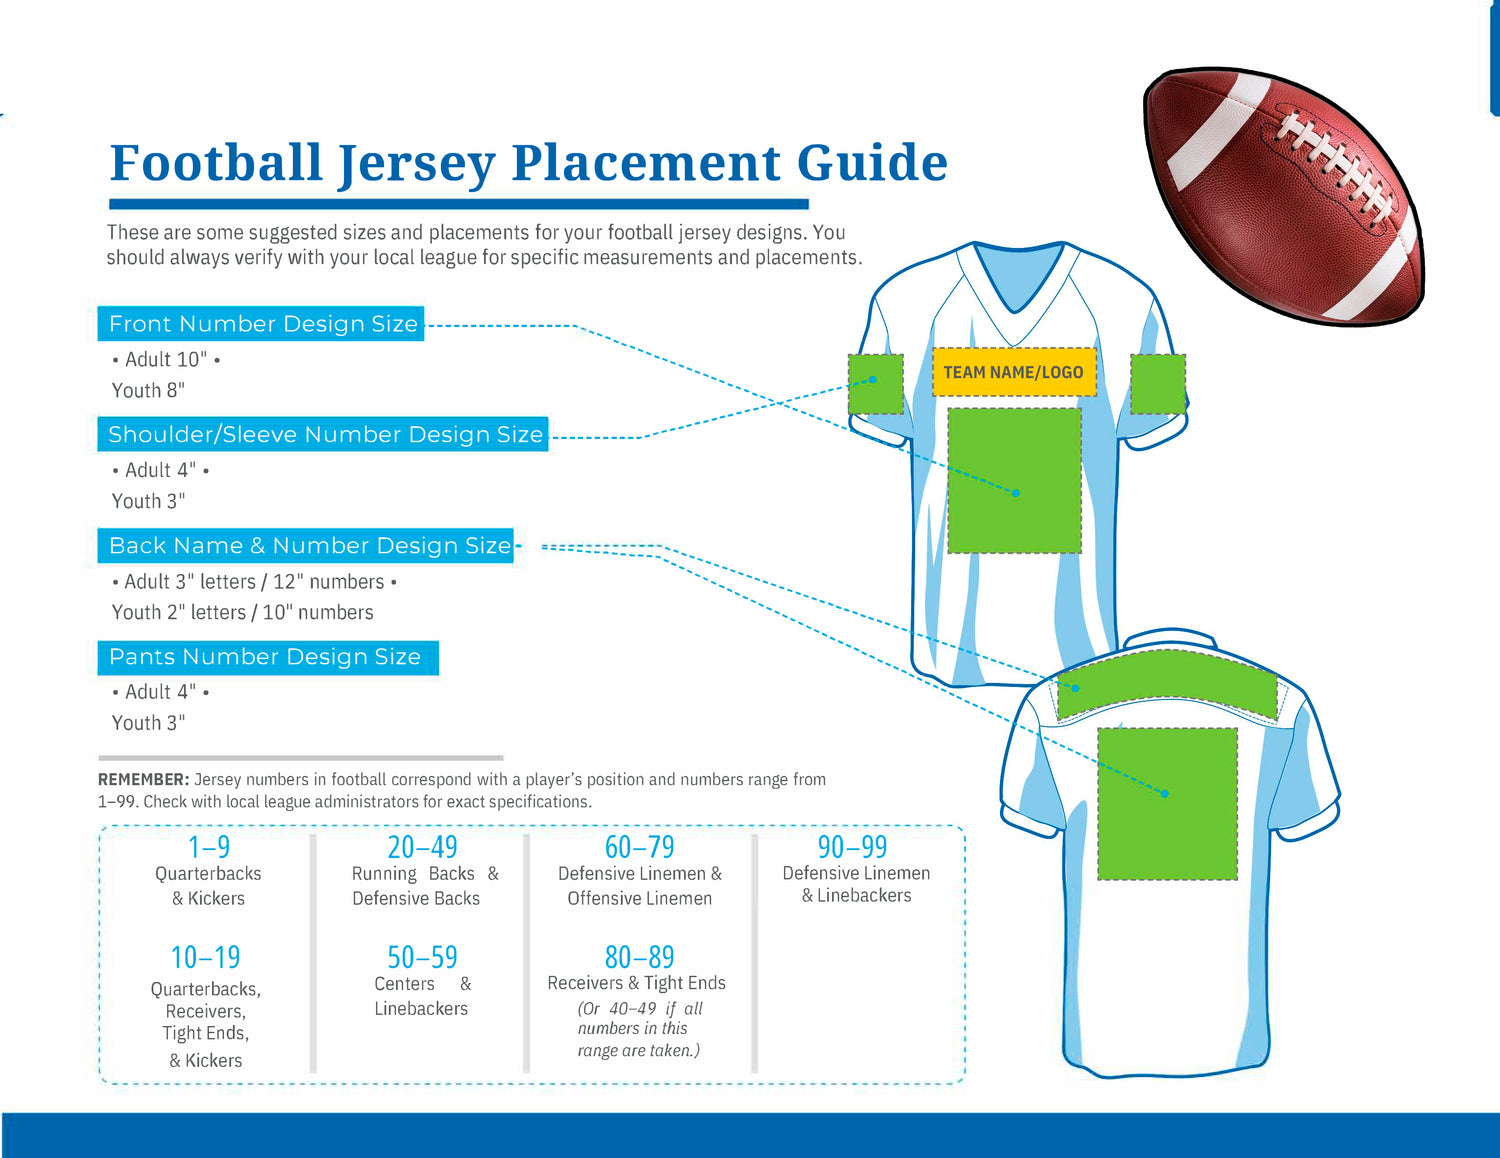 Football jersey DTF placement guide